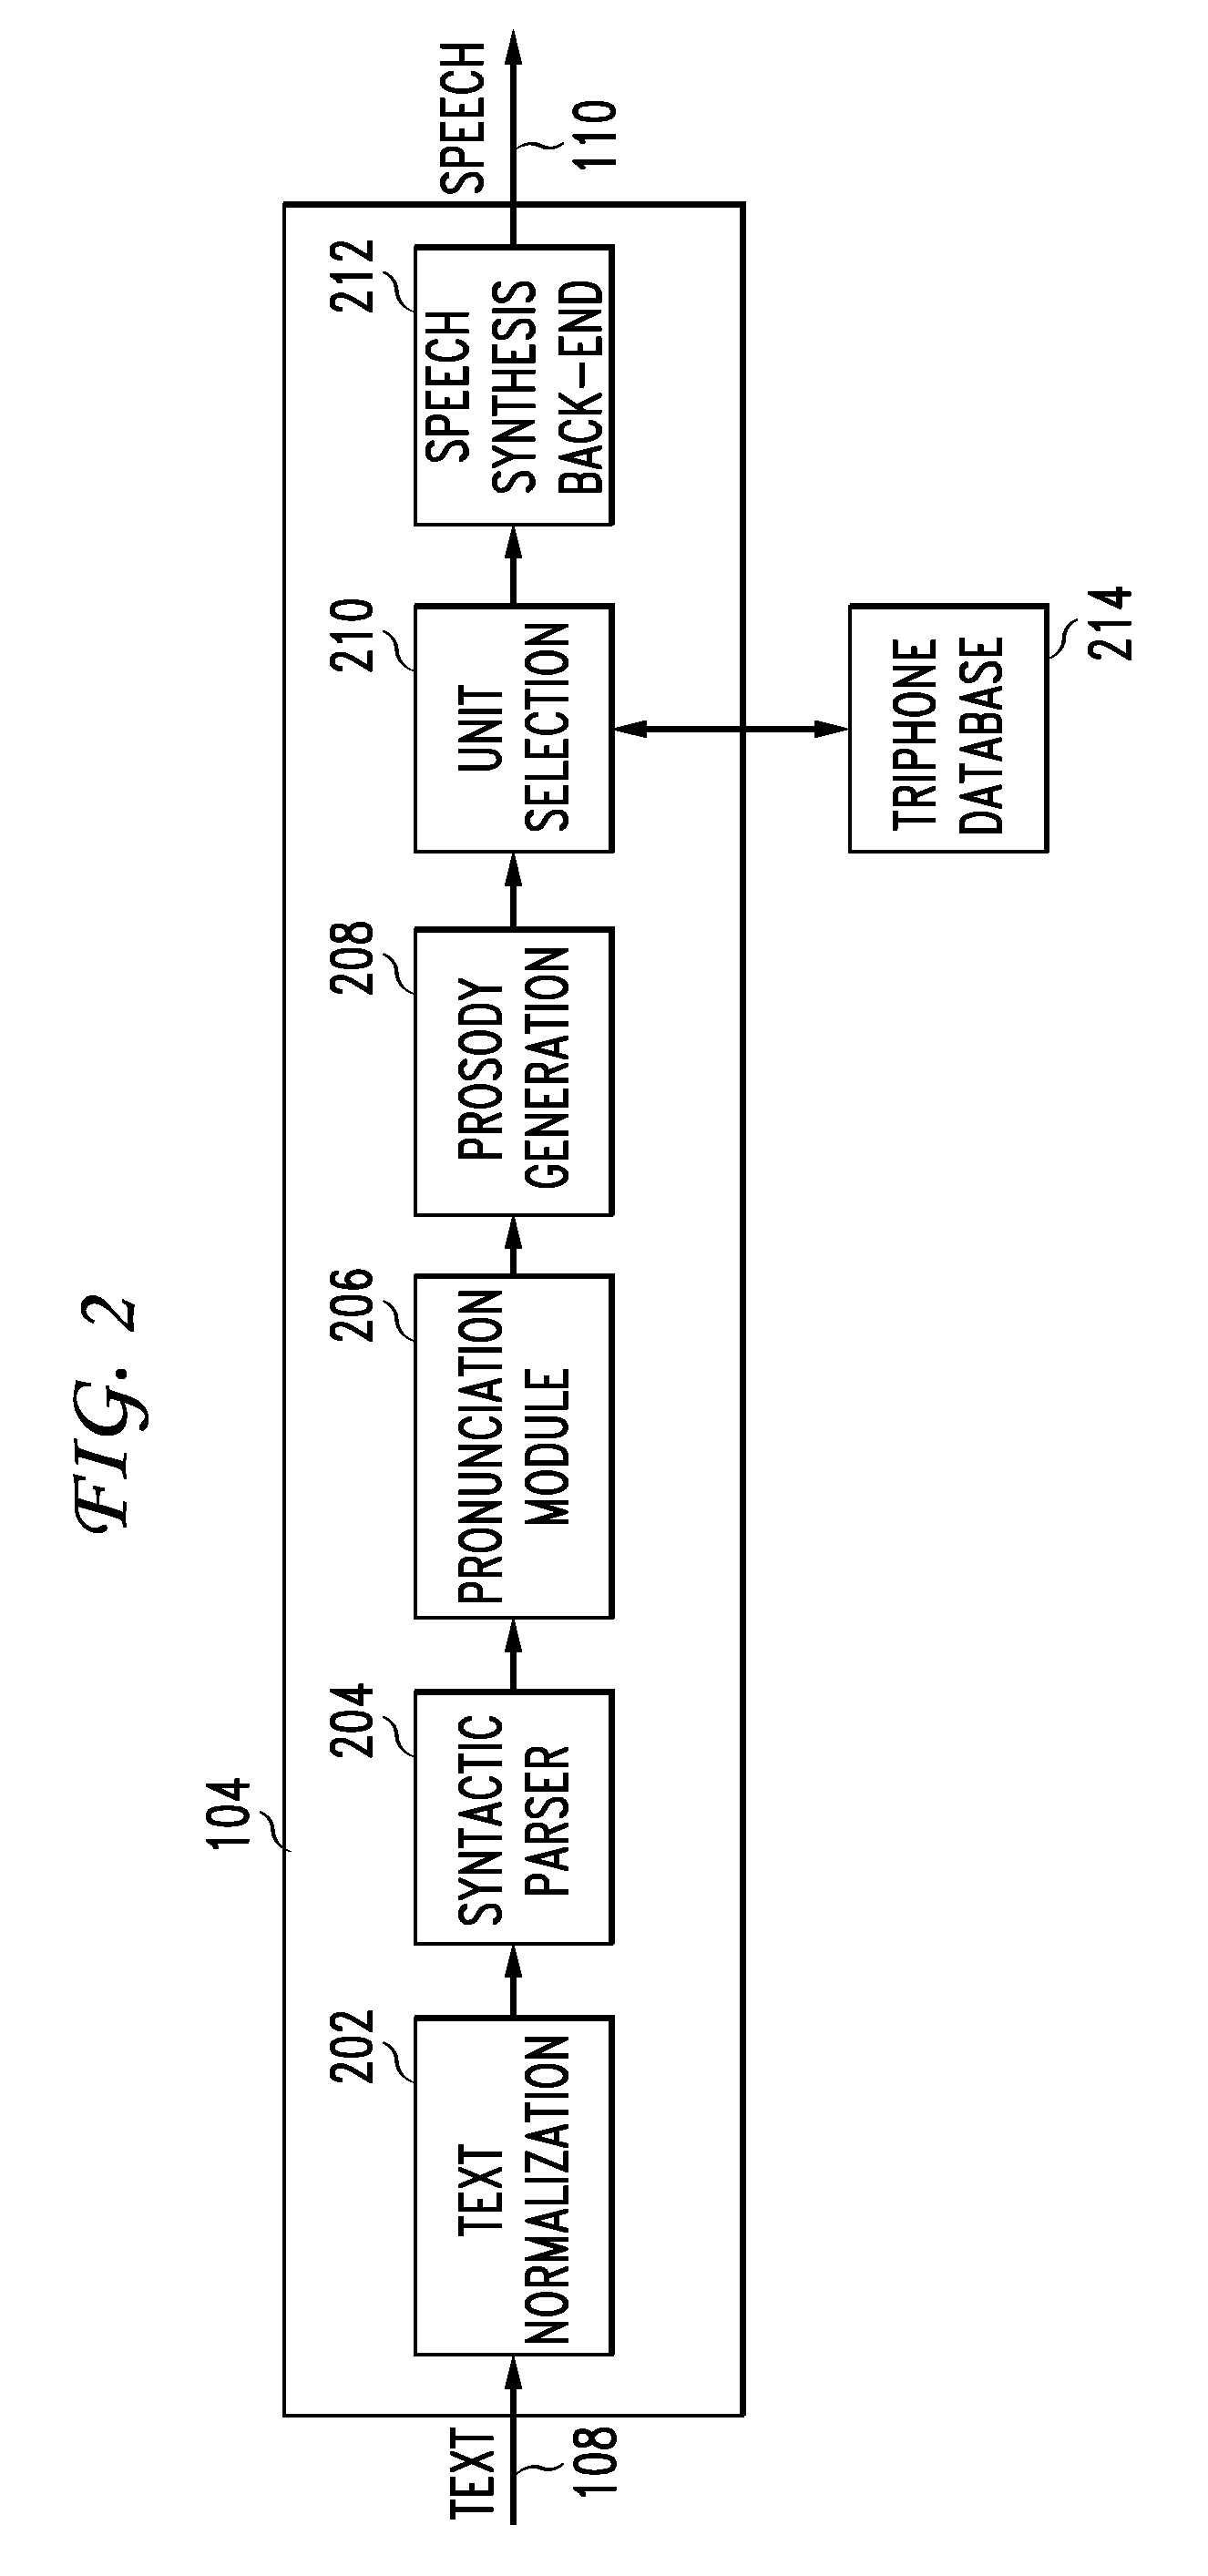 Method and system for preselection of suitable units for concatenative speech